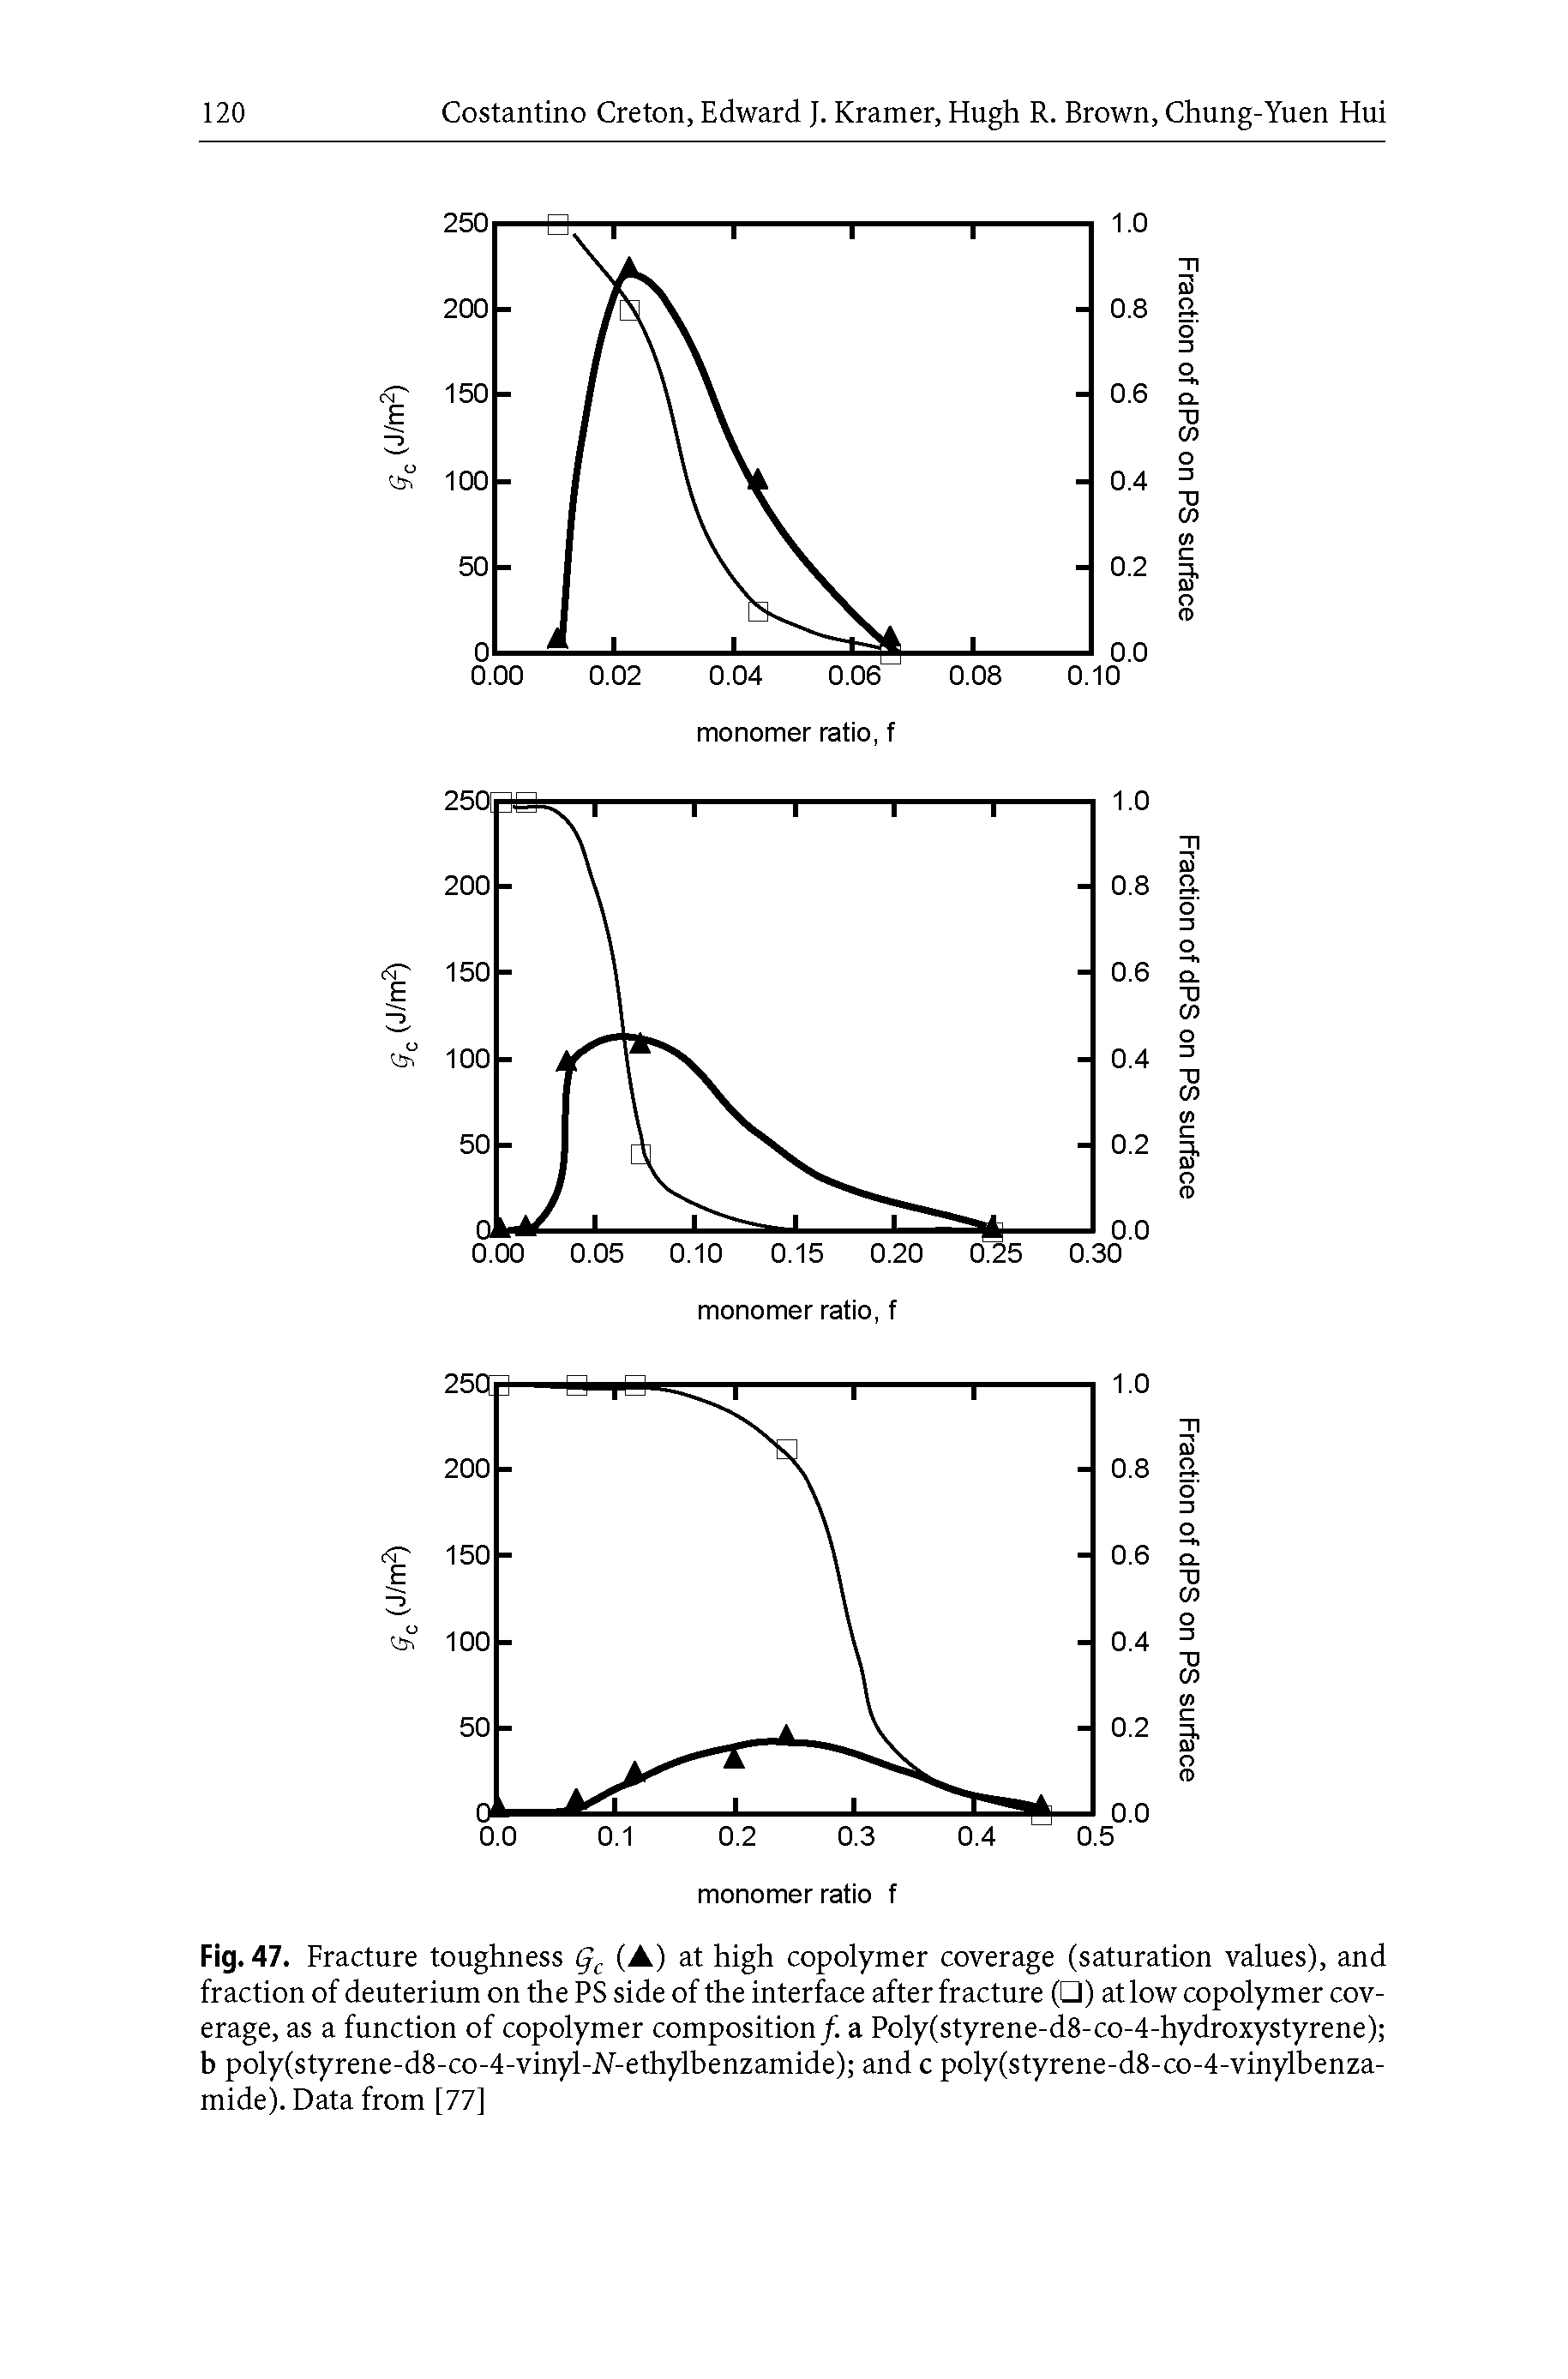 Fig. 47. Fracture toughness gc (A) at high copolymer coverage (saturation values), and fraction of deuterium on the PS side of the interface after fracture ( ) at low copolymer coverage, as a function of copolymer composition/, a Poly(styrene-d8-co-4-hydroxystyrene) b poly(styrene-d8-co-4-vinyl-AT-ethylbenzamide) and c poly(styrene-d8-co-4-vinylbenza-mide). Data from [77]...